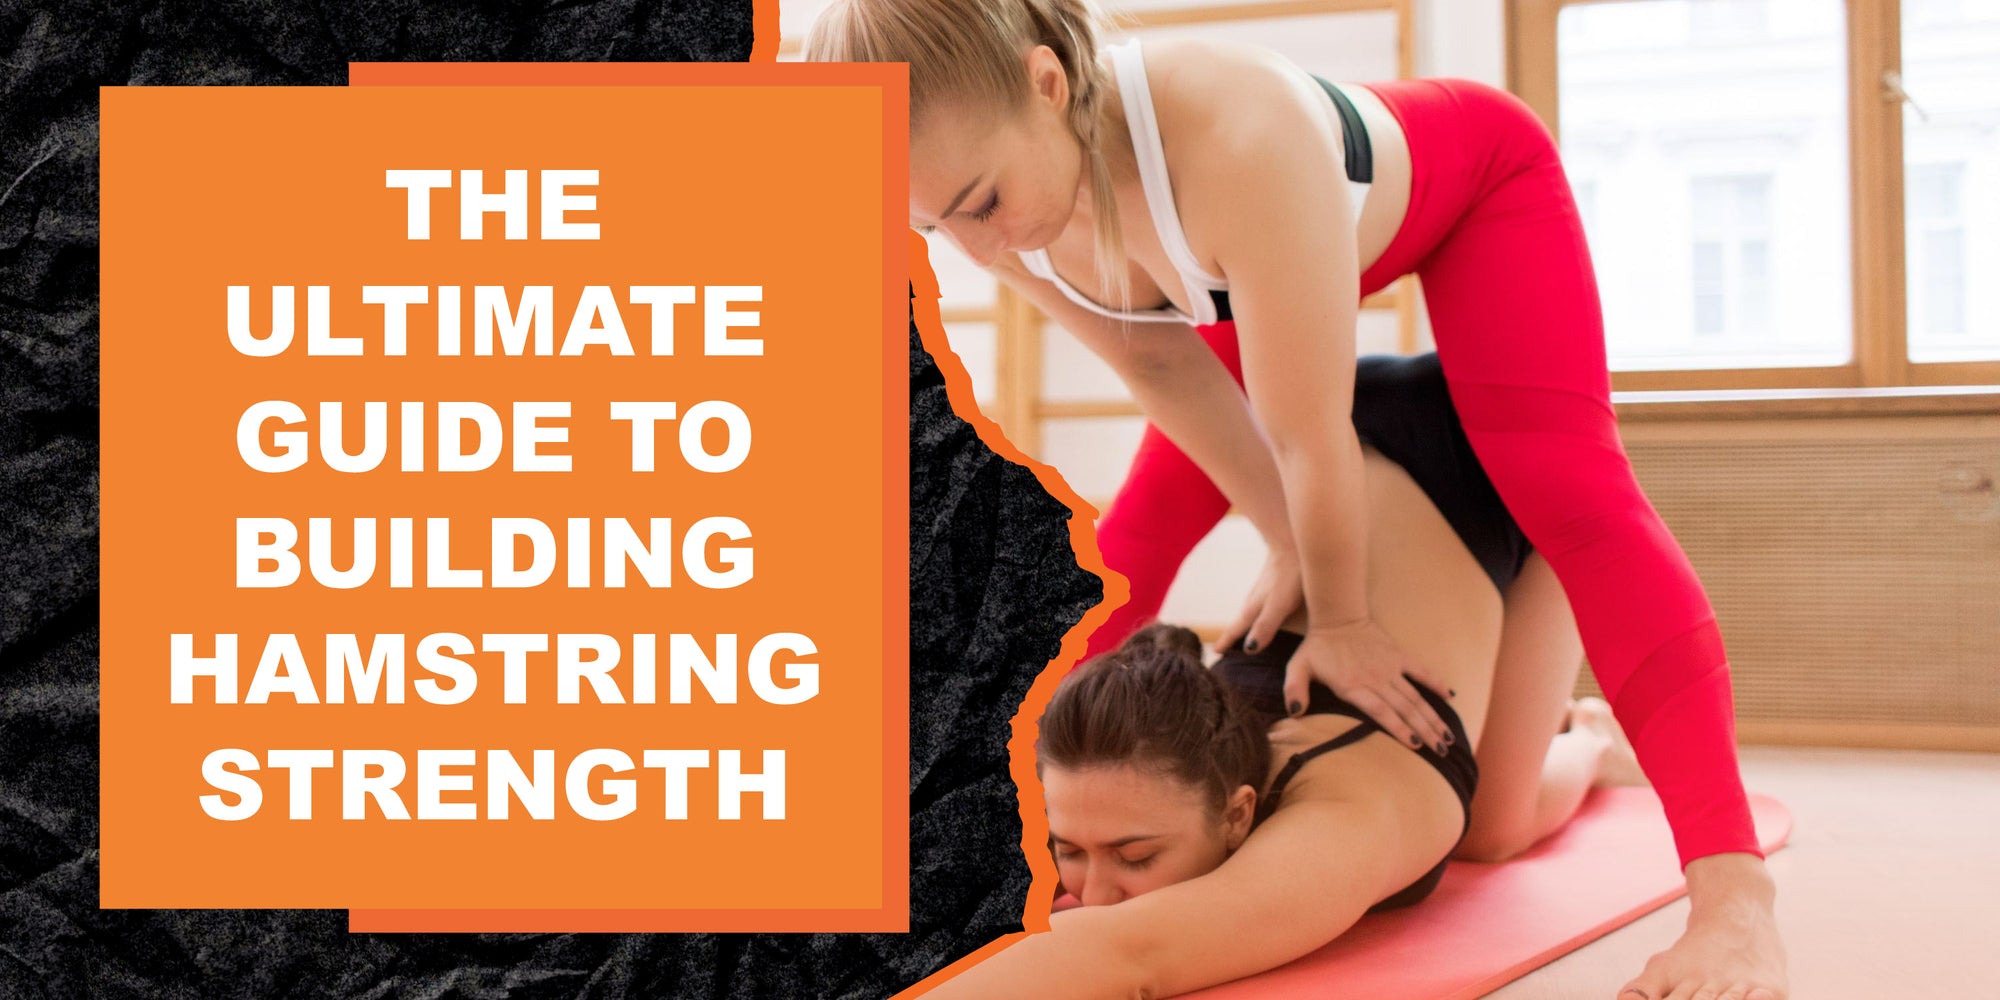 The Ultimate Guide to Building Hamstring Strength